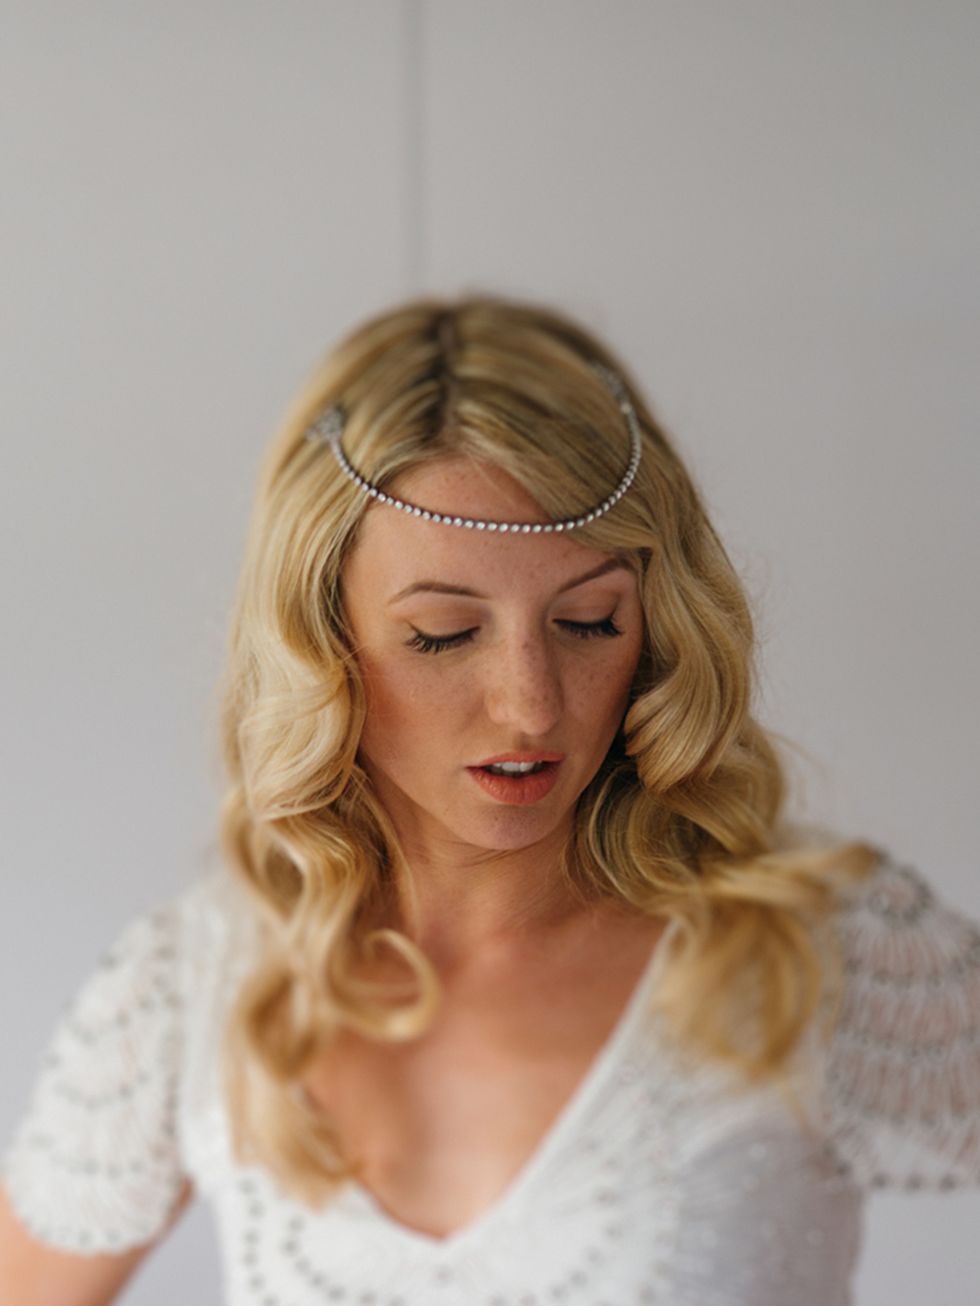 <p>I had my headpiece made by <a href="https://www.etsy.com/uk/shop/AgnesHart" target="_blank">Agnes Hart</a>. We sourced original 1920's dress clips and Agnes Hart turned these into a forehead band.</p>